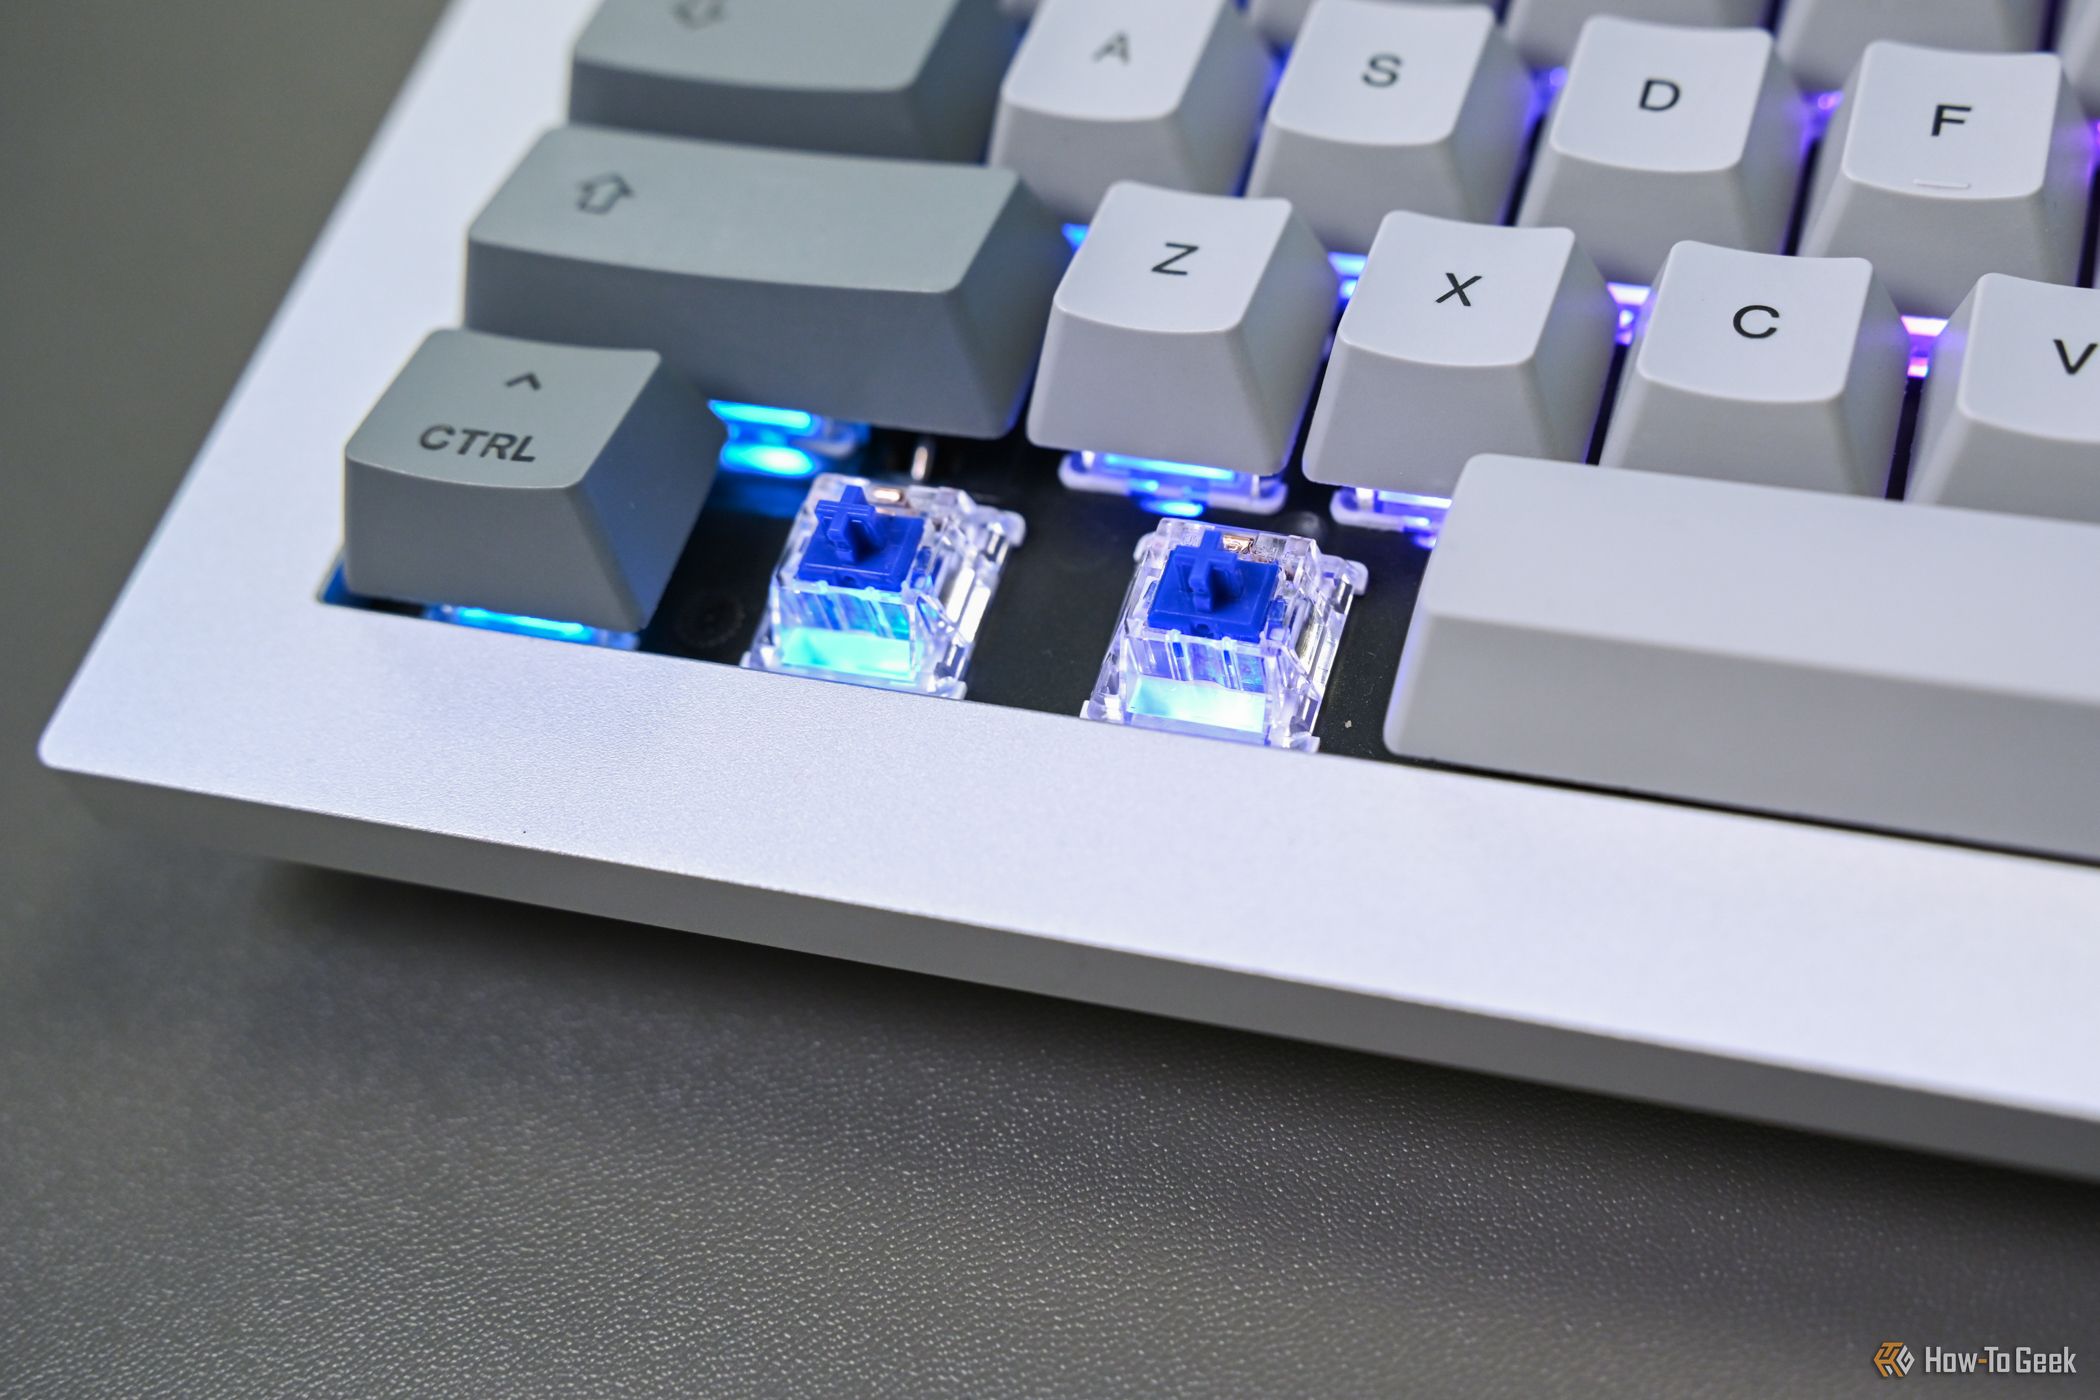 Showing the keycaps removed from the OnePlus Keyboard 81 Pro